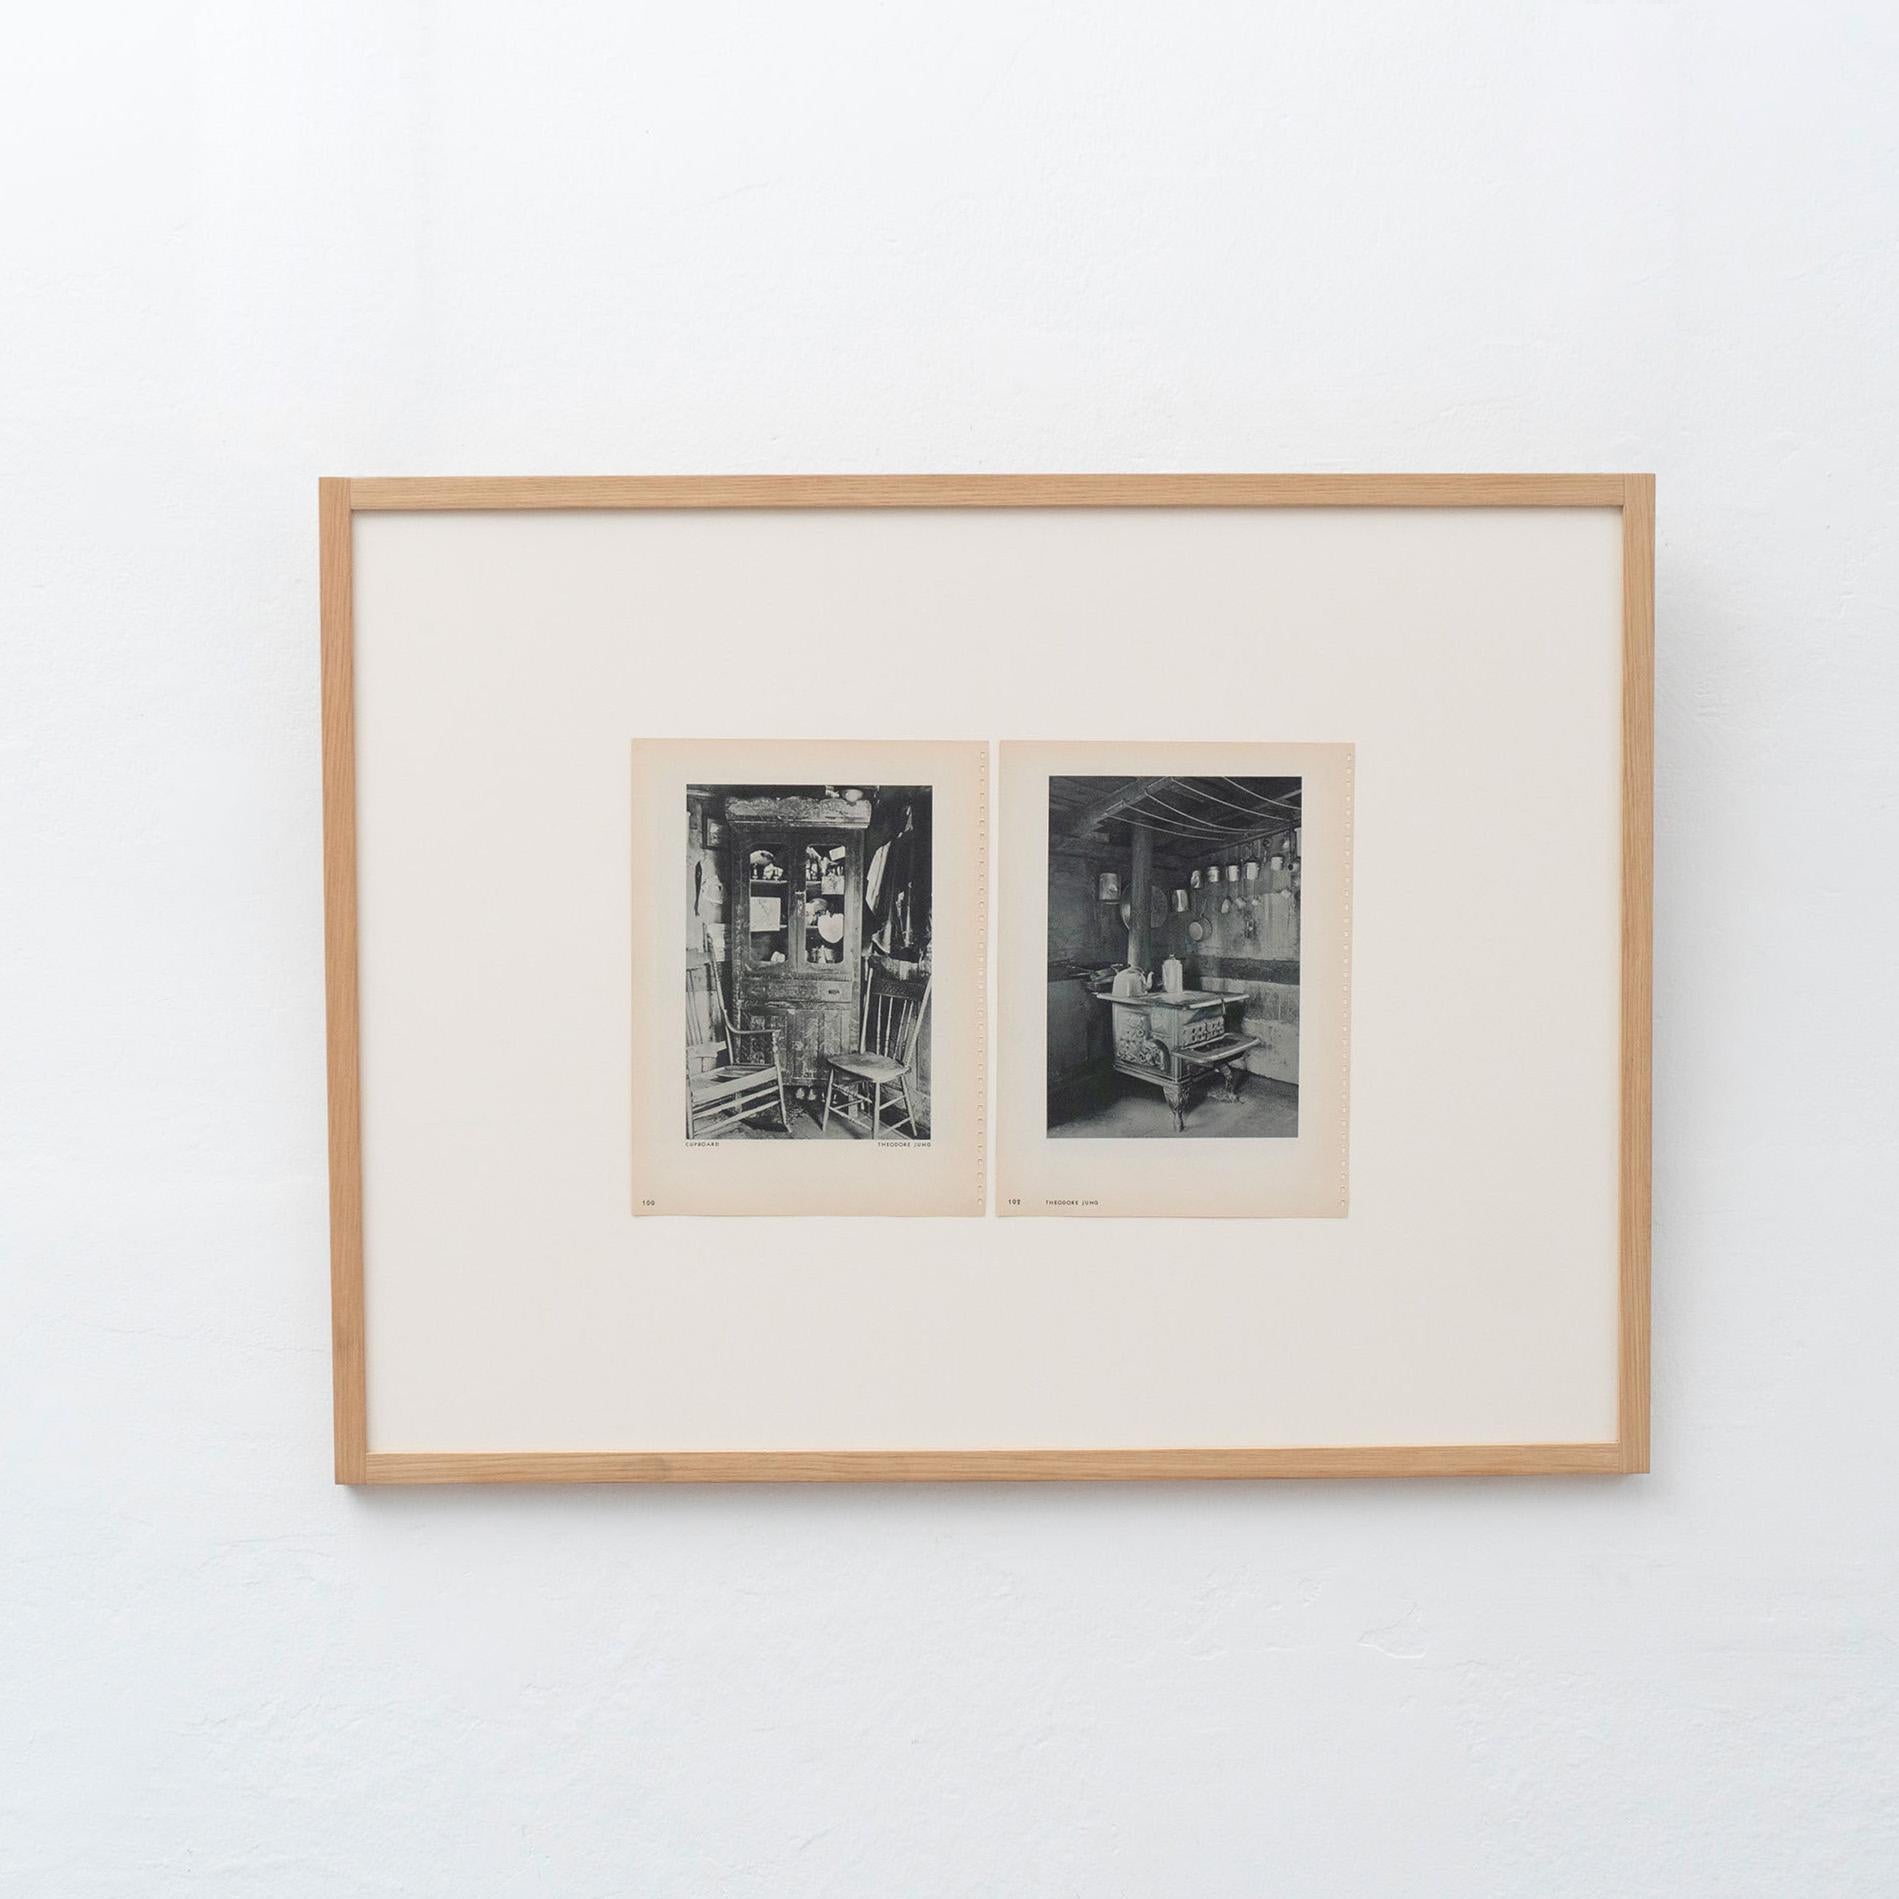 Vintage photo gravure by the photographer Theodore Jung, circa 1940.
Wood frame with passepartout and high quality museum's glass.

In original condition, with minor wear consistent with age and use, preserving a beautiful patina.